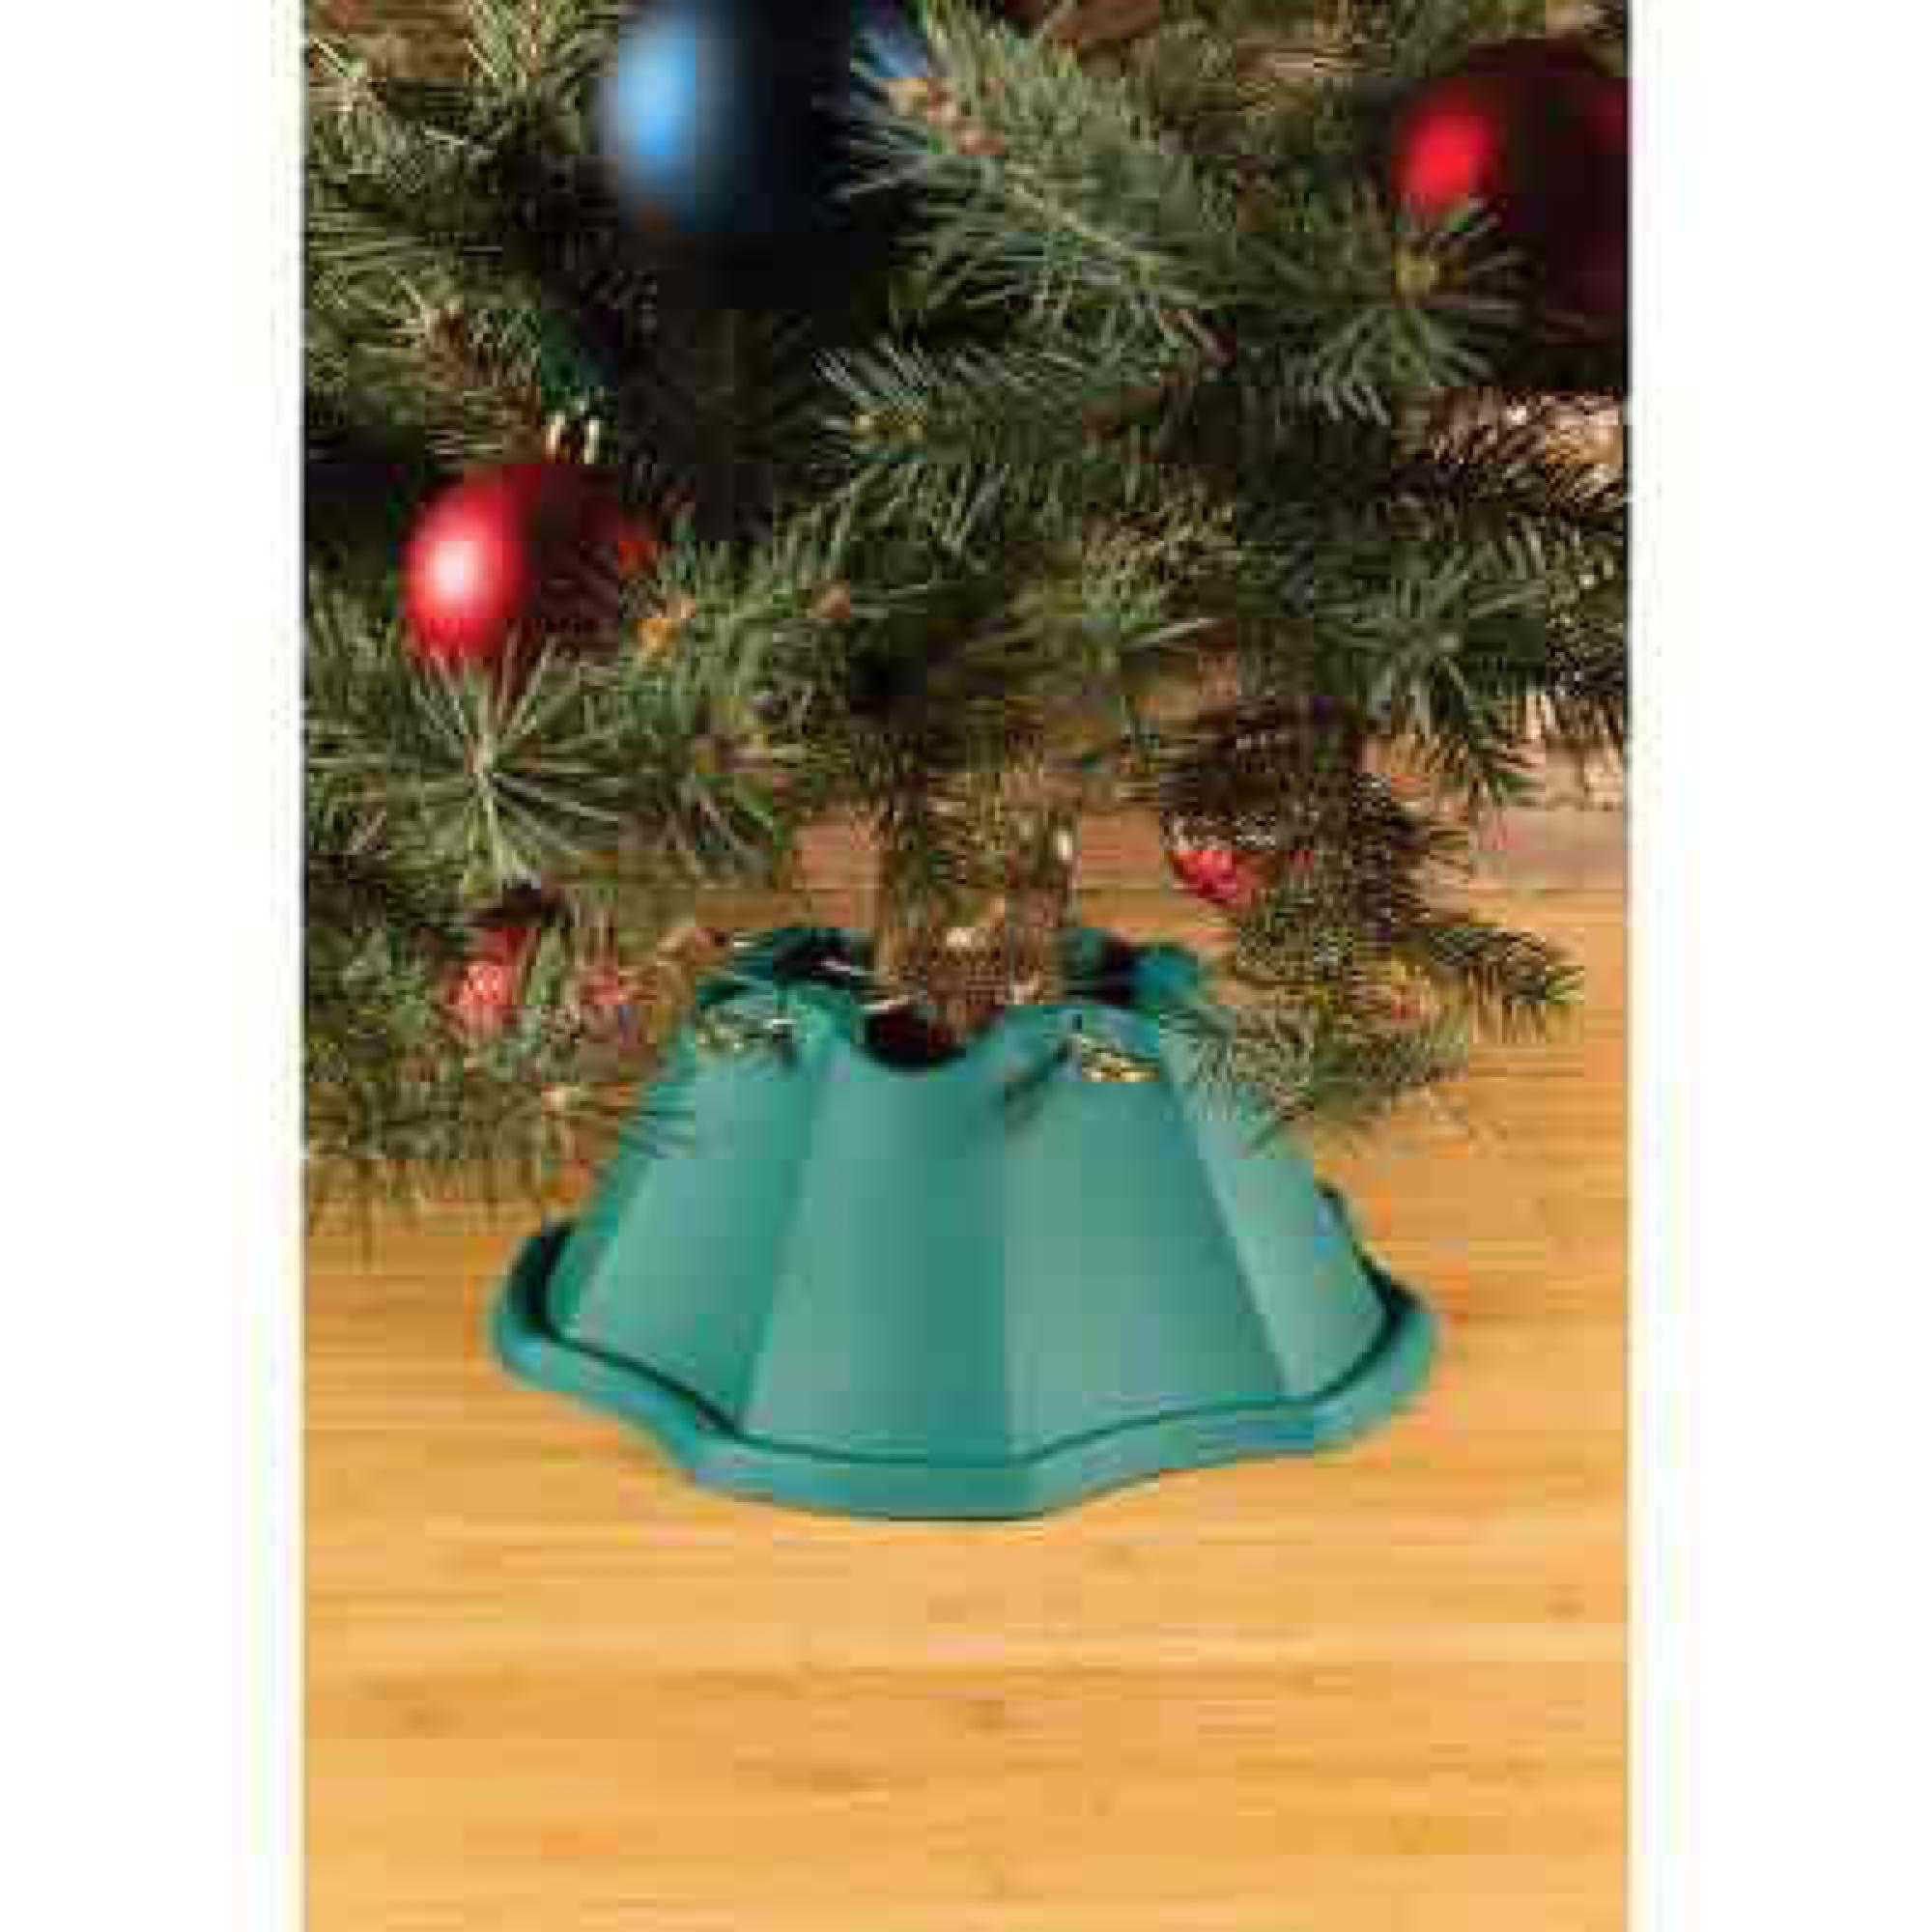 Home Accents Holiday Oasis Medium Green Plastic Tree Stand for Trees Up to 8 ft. Tall